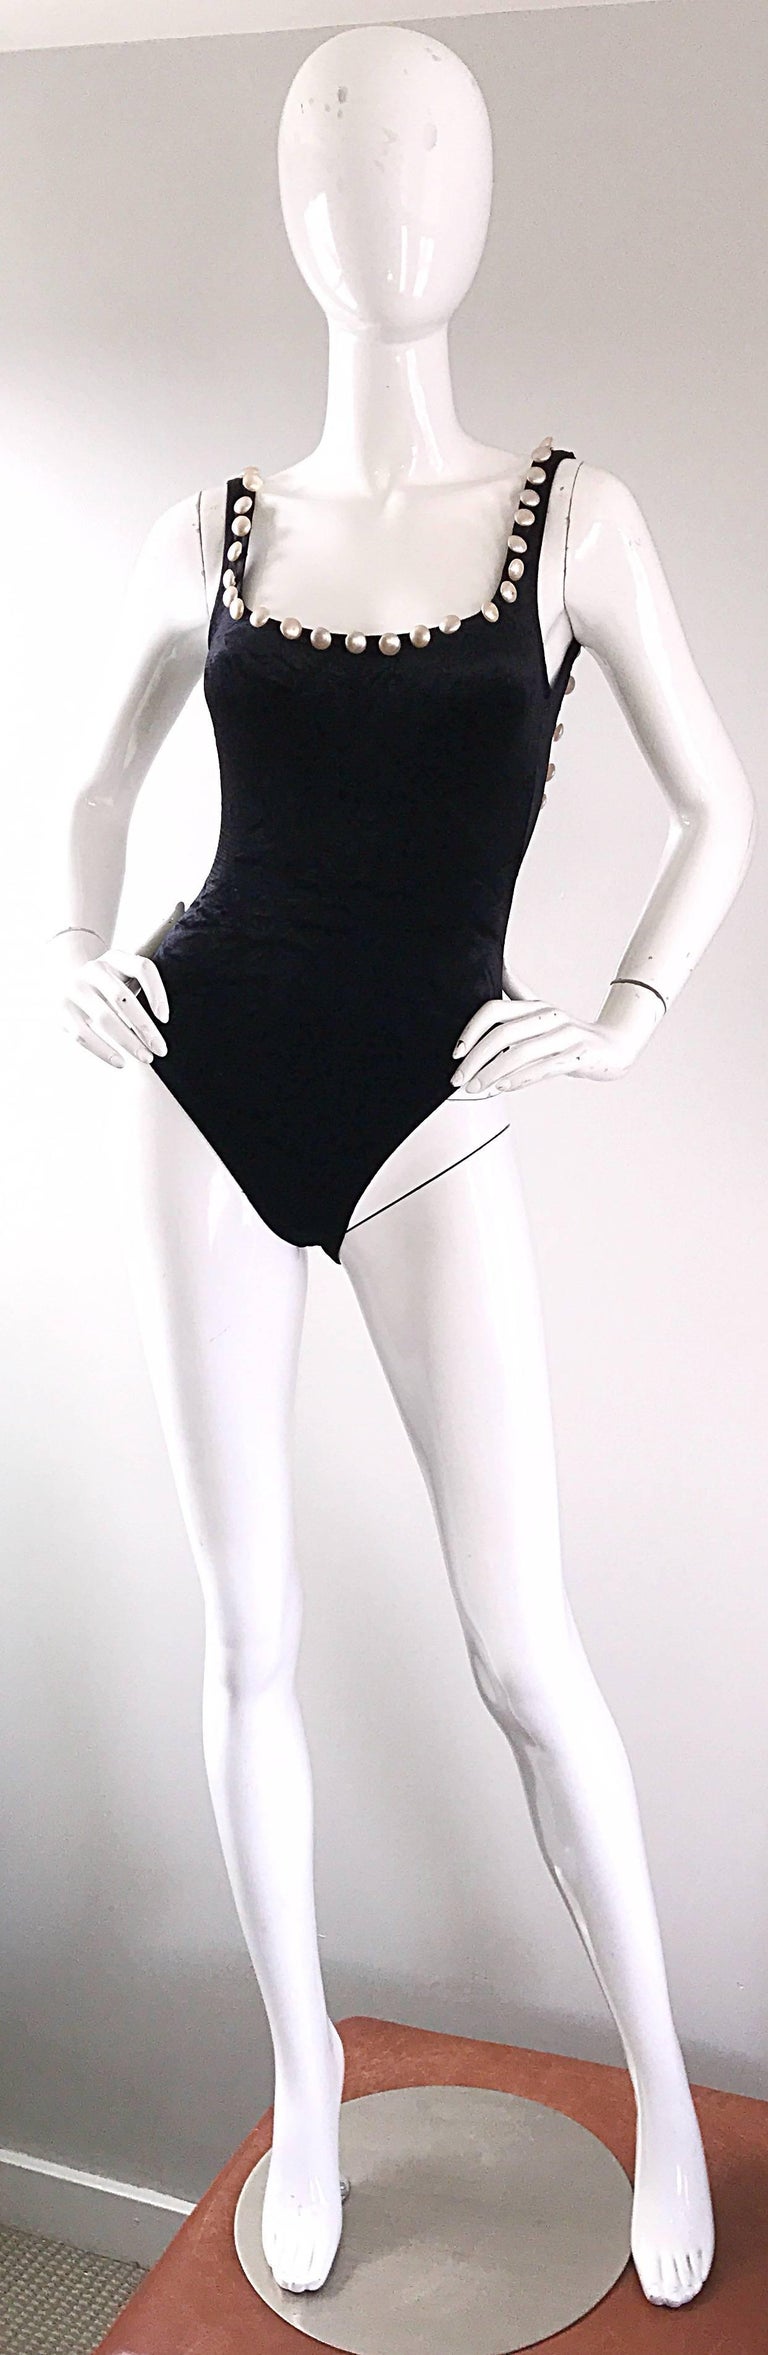 Vintage Moschino 1990s Black and White Velour Pearl Encrusted Bodysuit Swimsuit For Sale 1